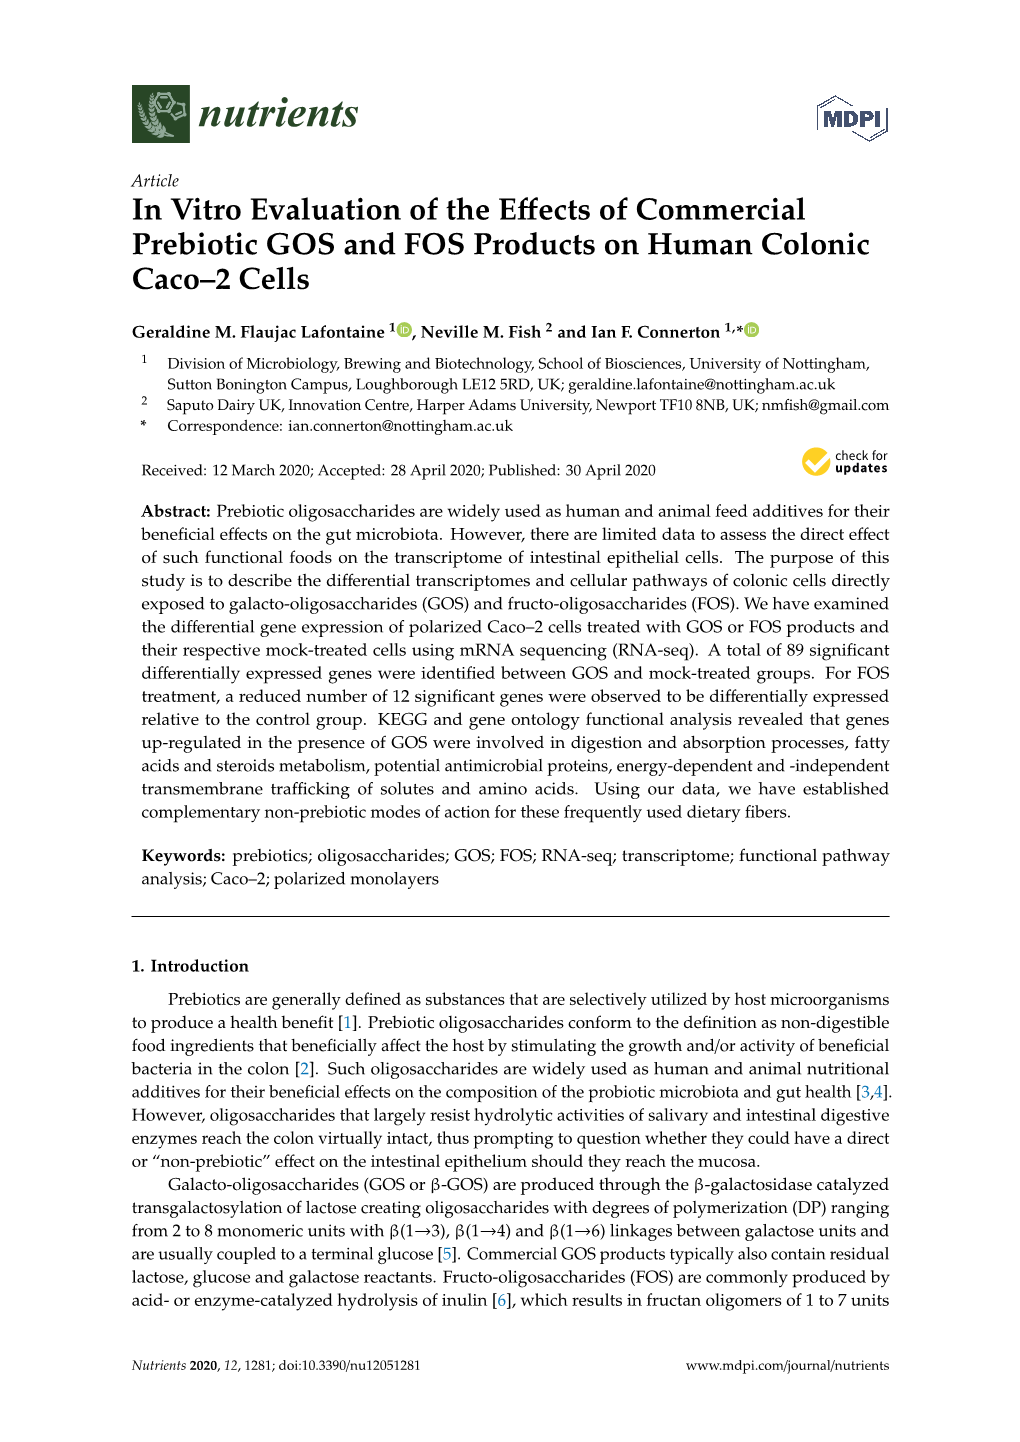 In Vitro Evaluation of the Effects of Commercial Prebiotic GOS